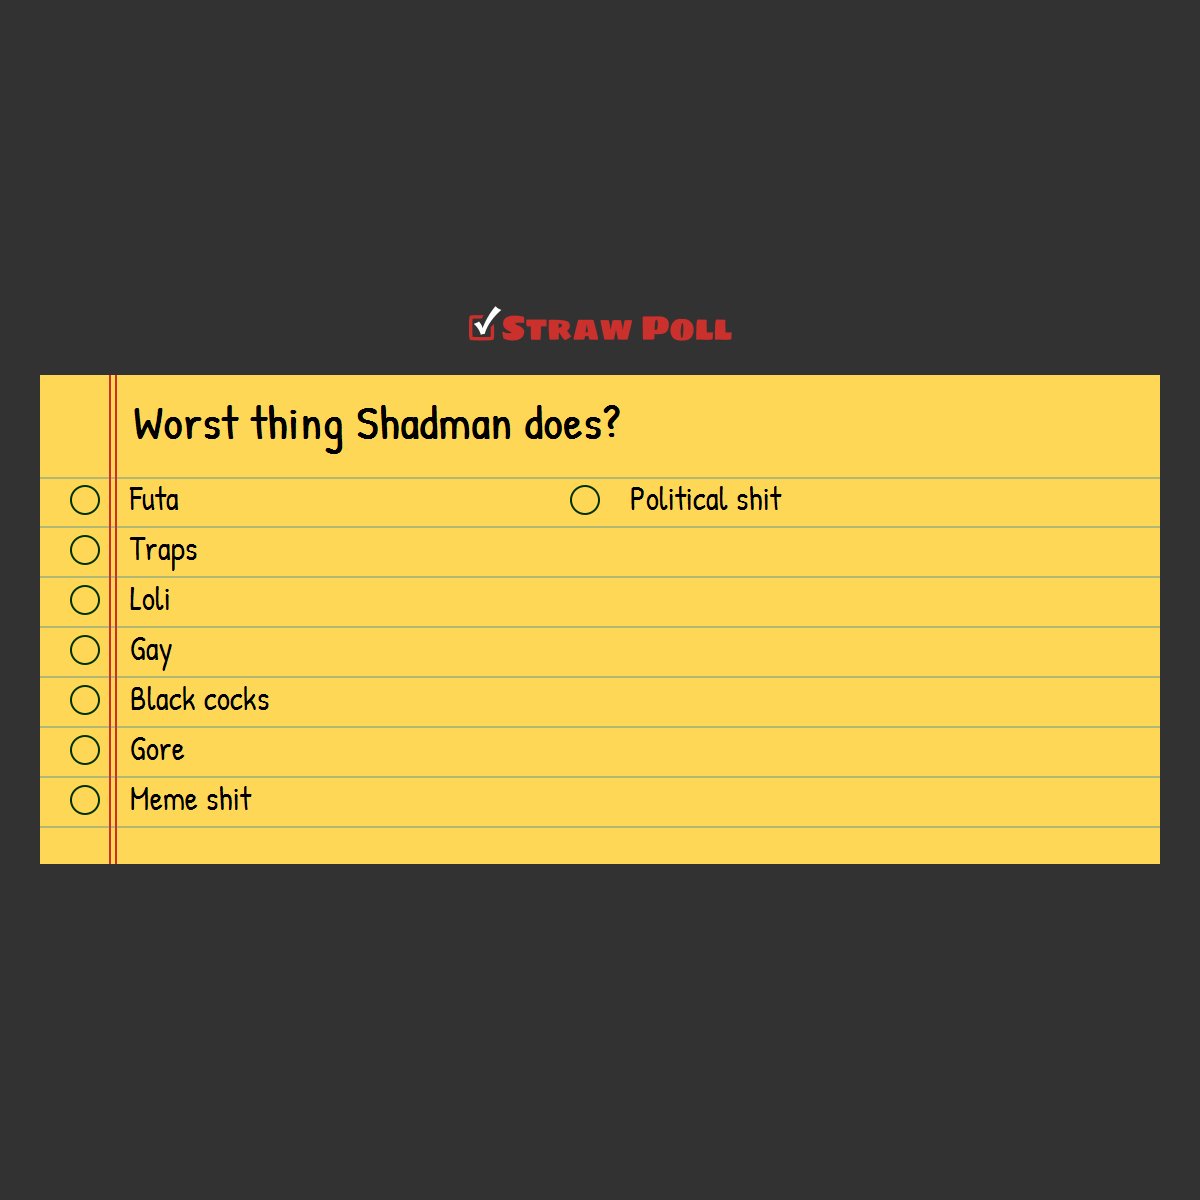 What is the worst thing Shadman does in his art? (POLL)